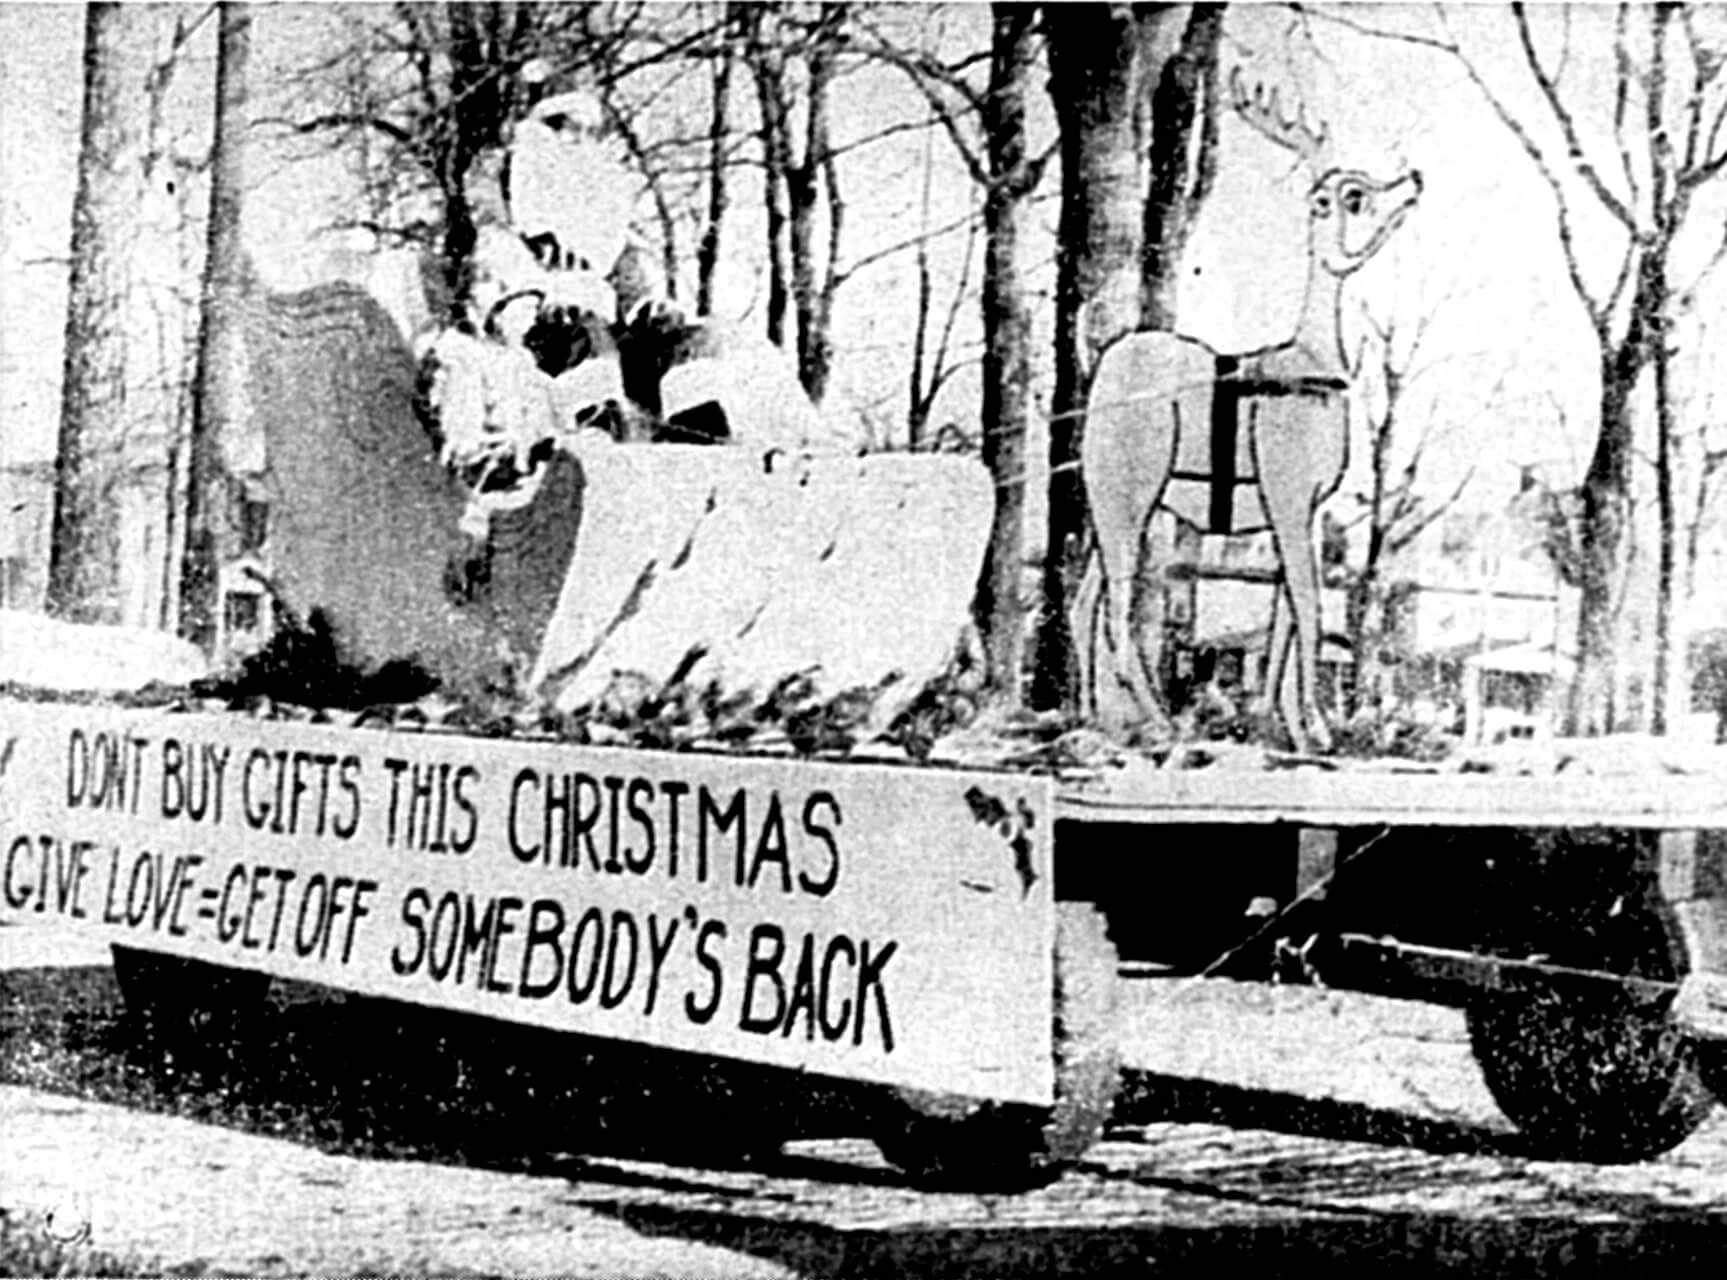 The NAACP’s 1966 float featured Santa Claus (Merlin Kennedy) in a sled and with a sign that read “Don’t Buy Gifts This Christmas, Give Love = Get off Somebody’s Back